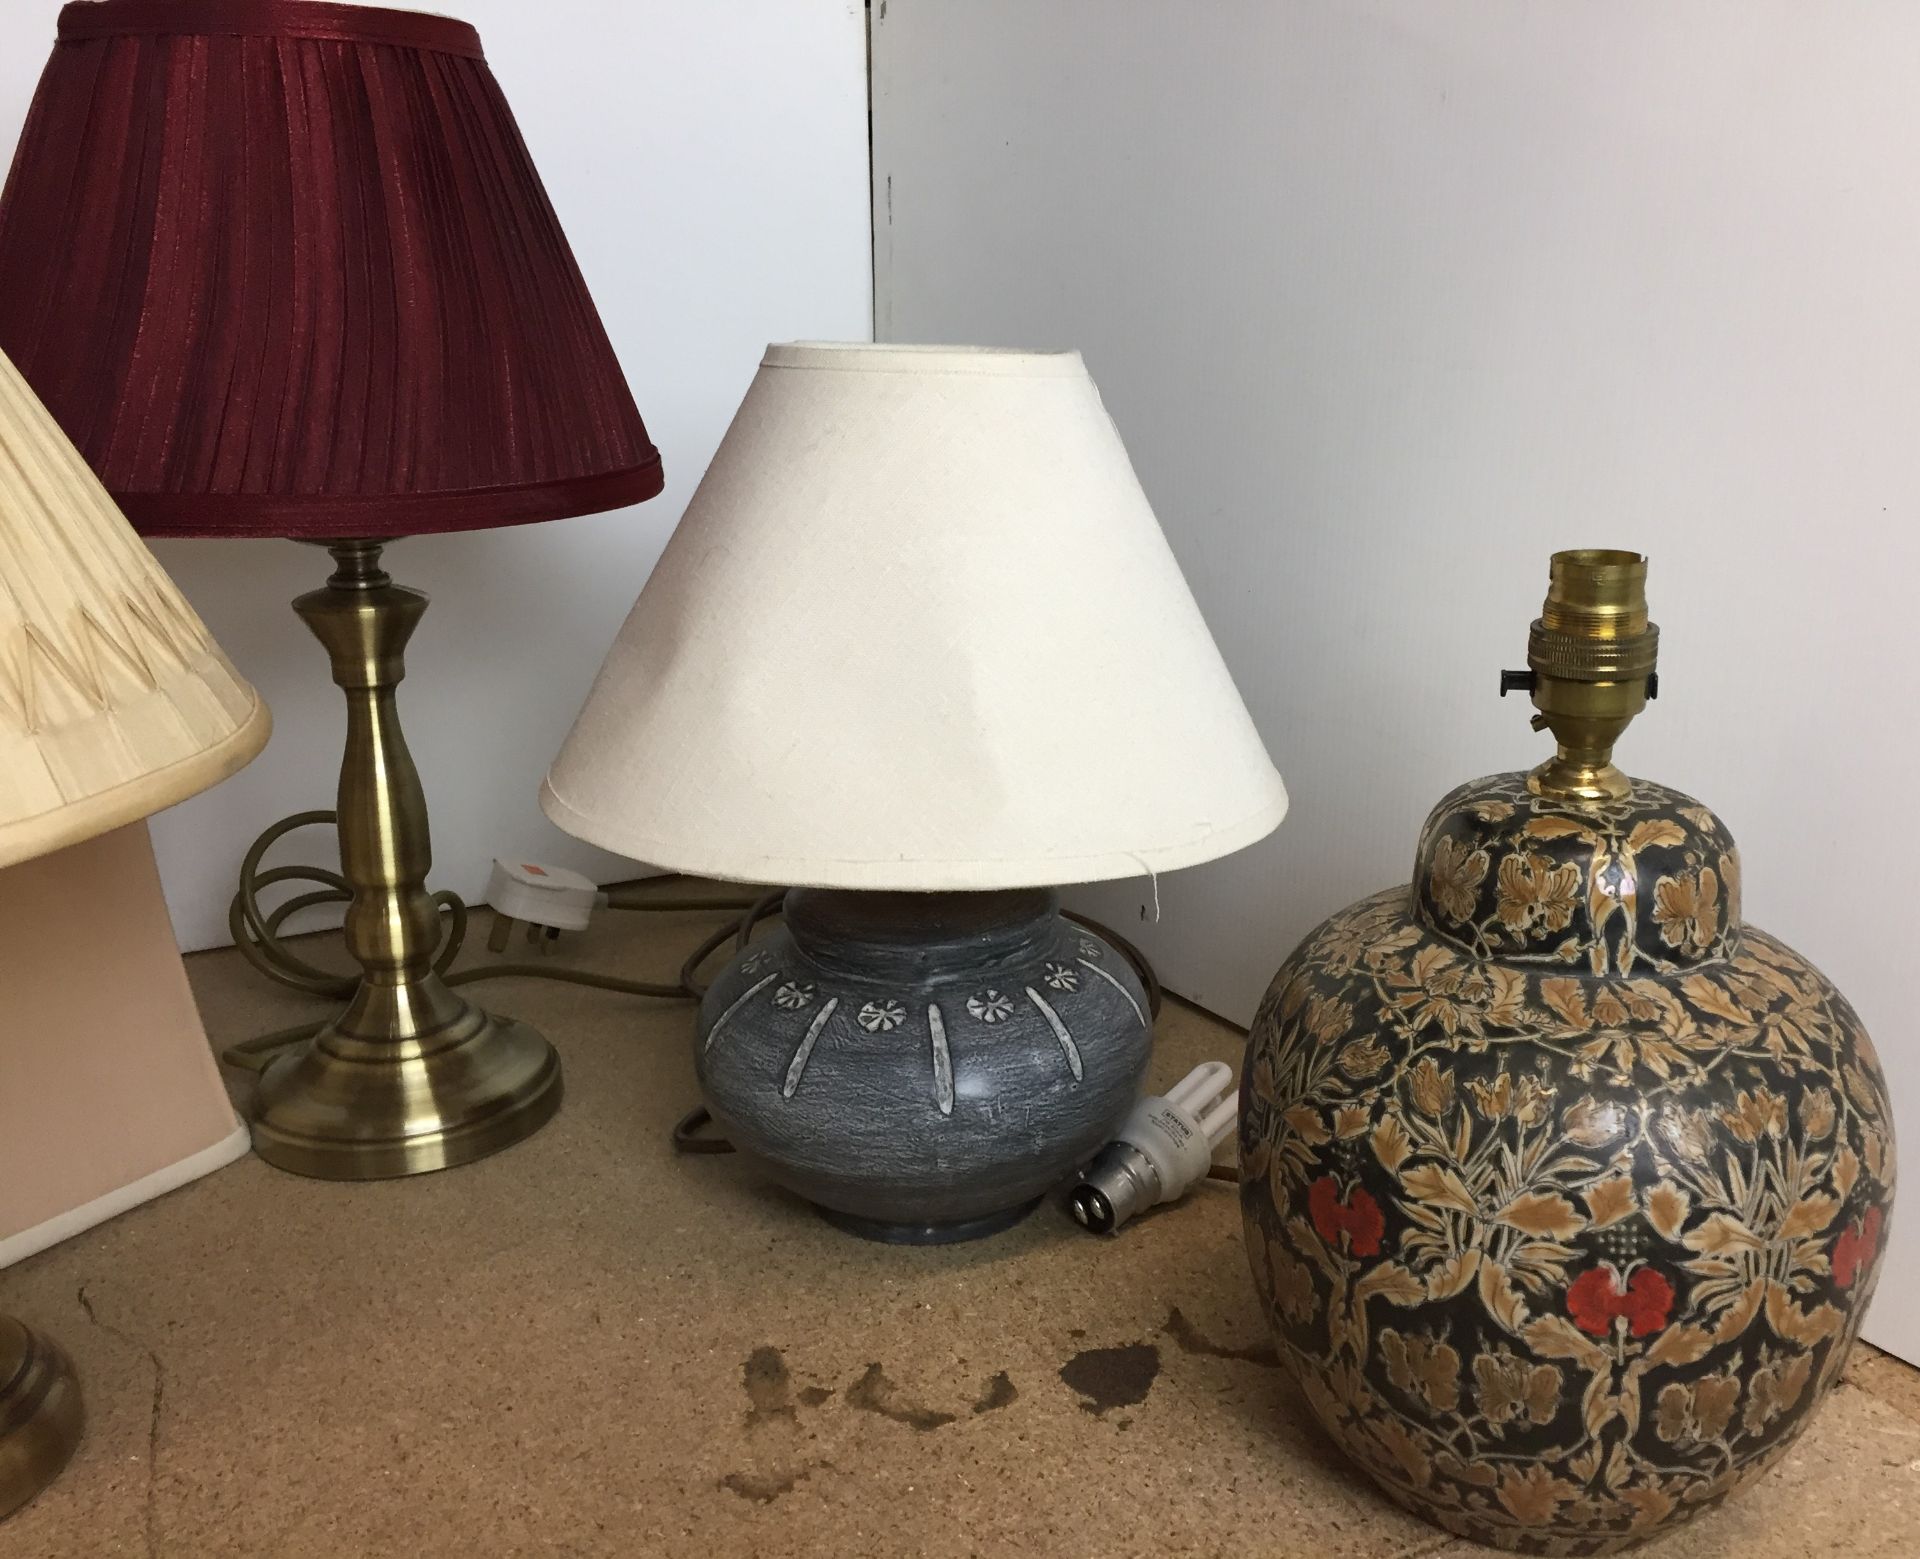 Five table lamps and shades (orange shade damaged) including Imari patterned, brass and glass, - Image 3 of 3